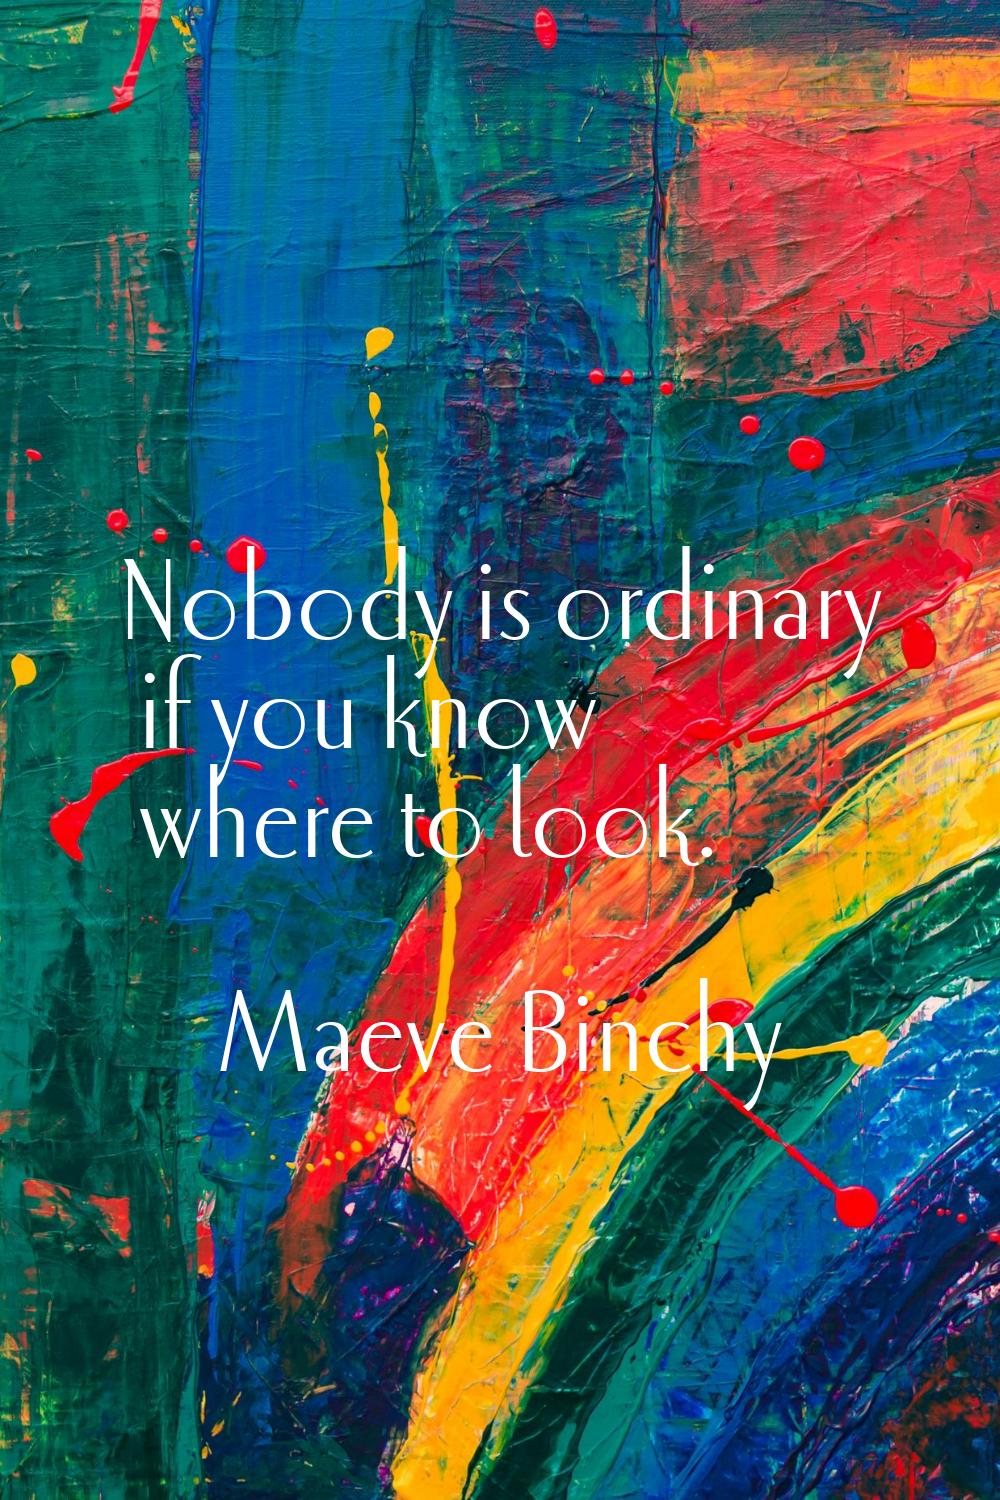 Nobody is ordinary if you know where to look.